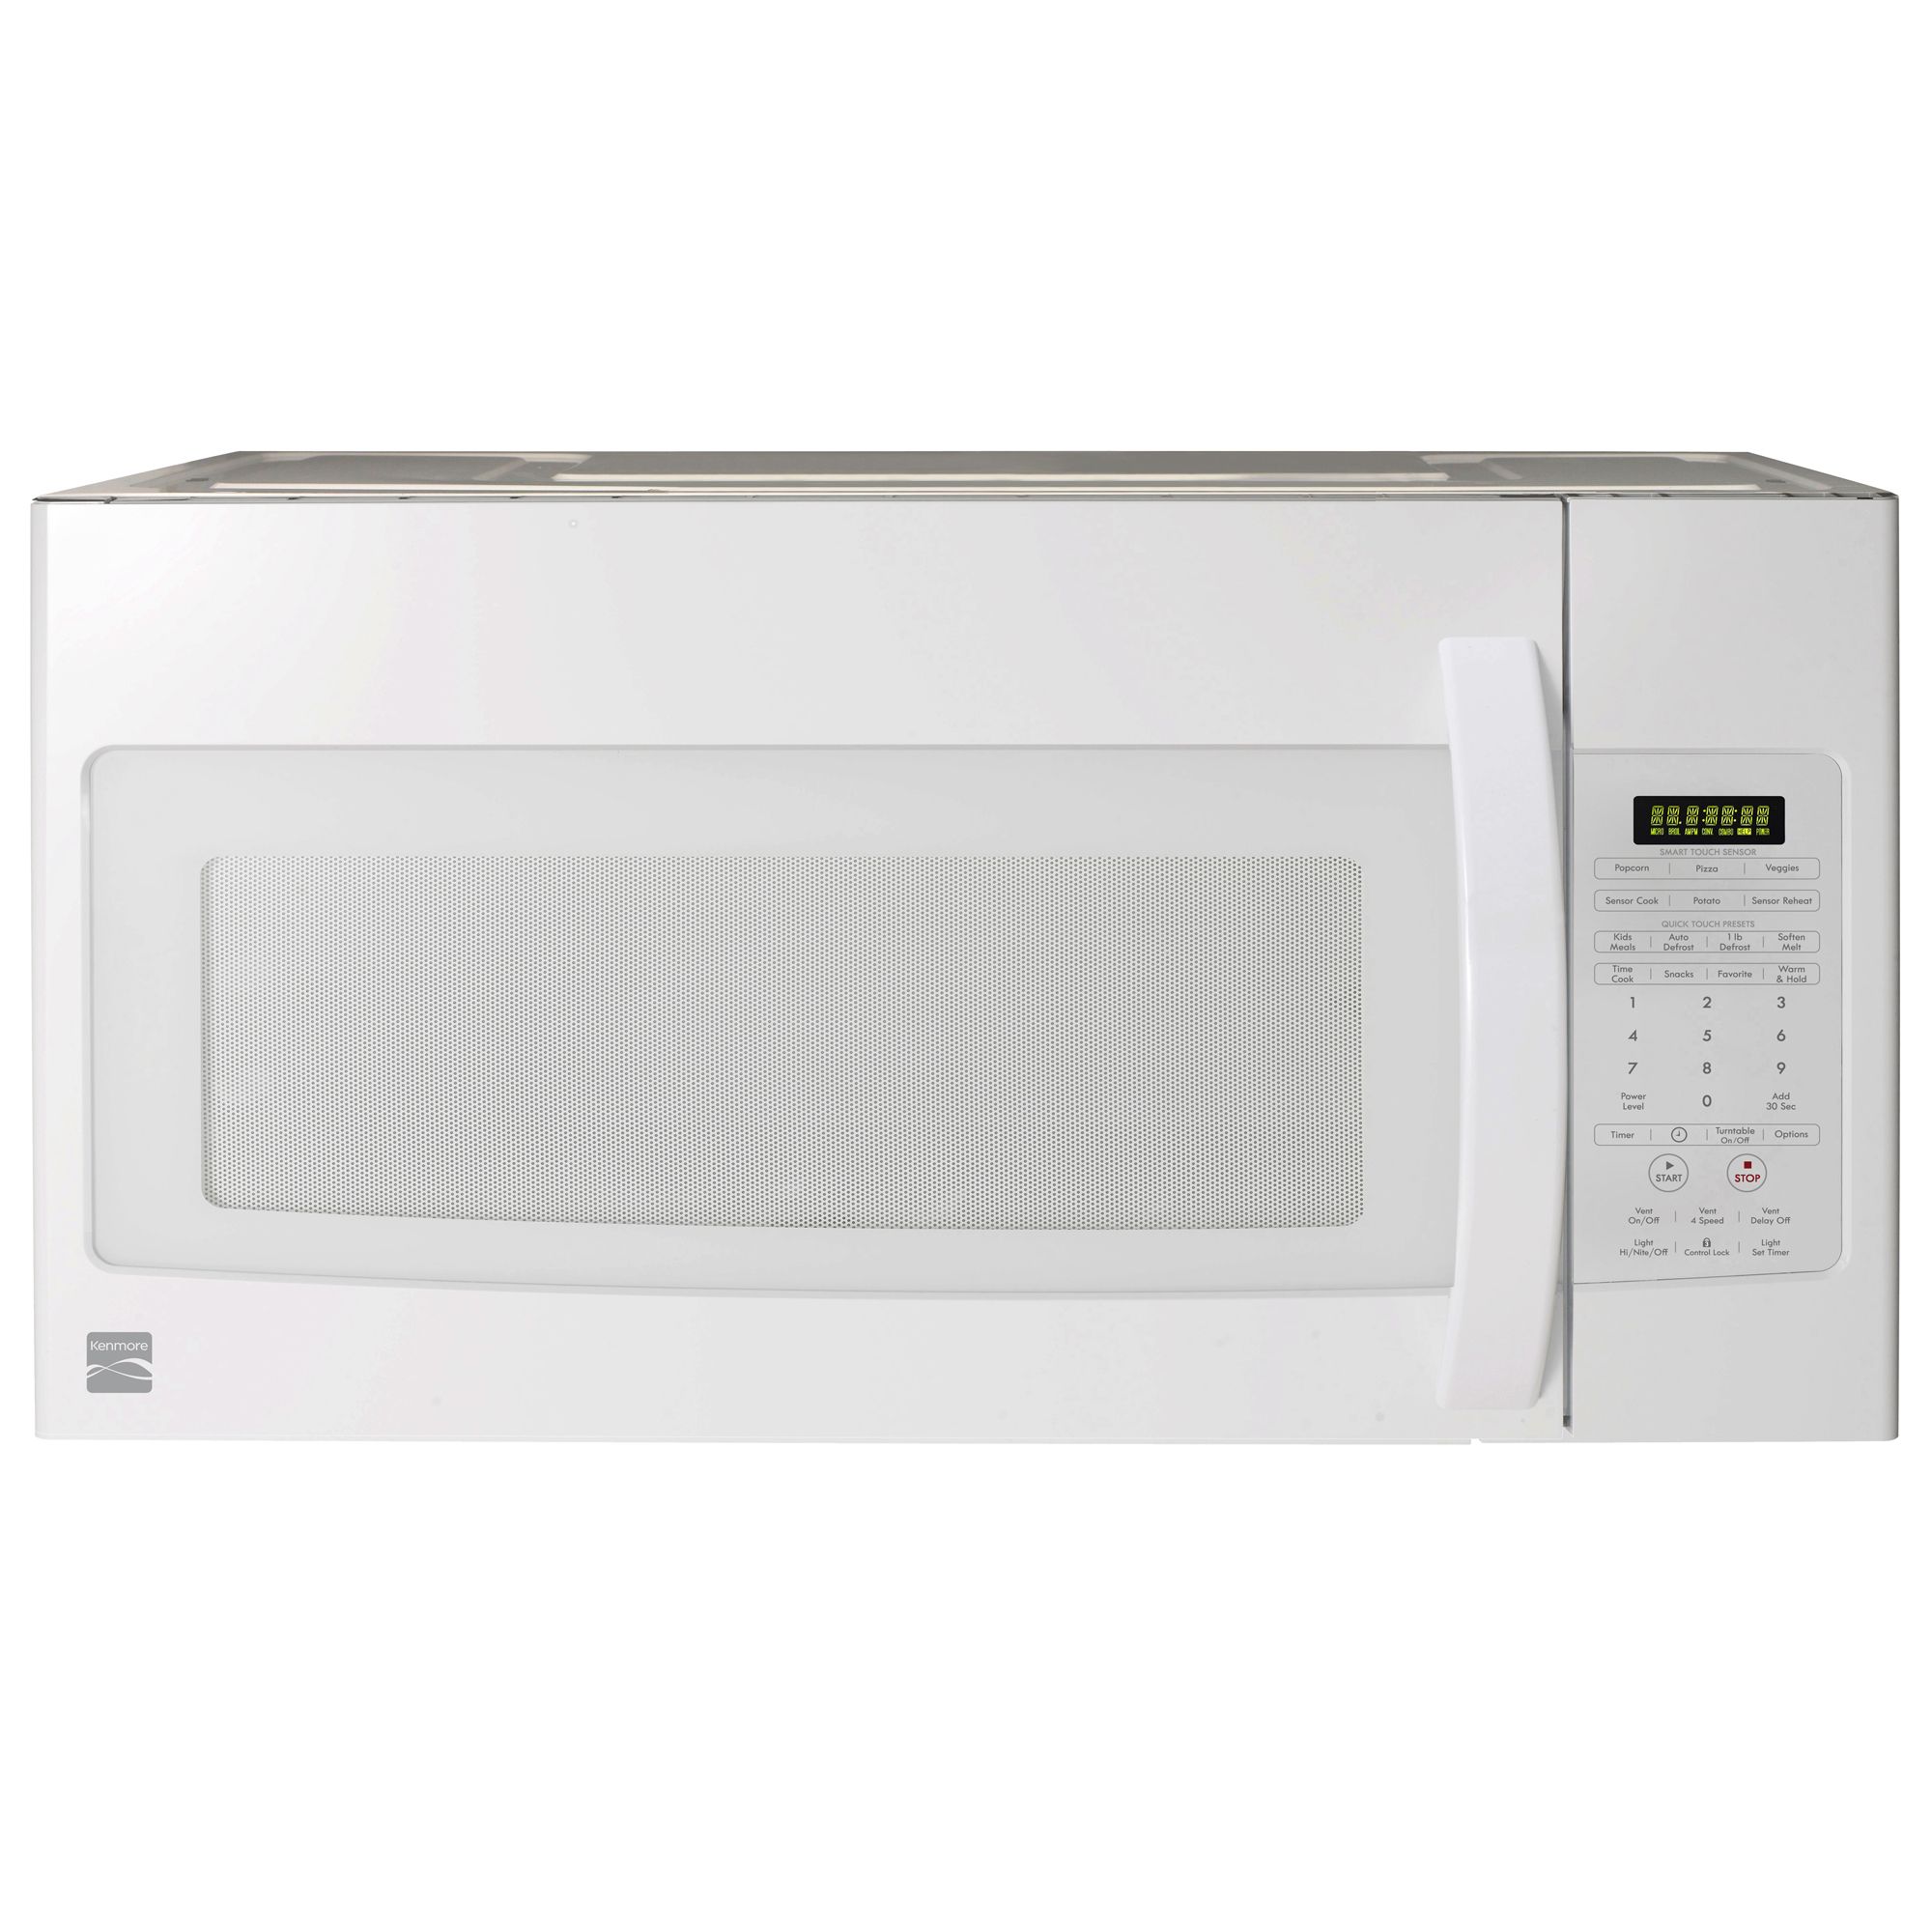 Kenmore 85052 1.9 cu. ft. Over-the-Range Microwave Oven